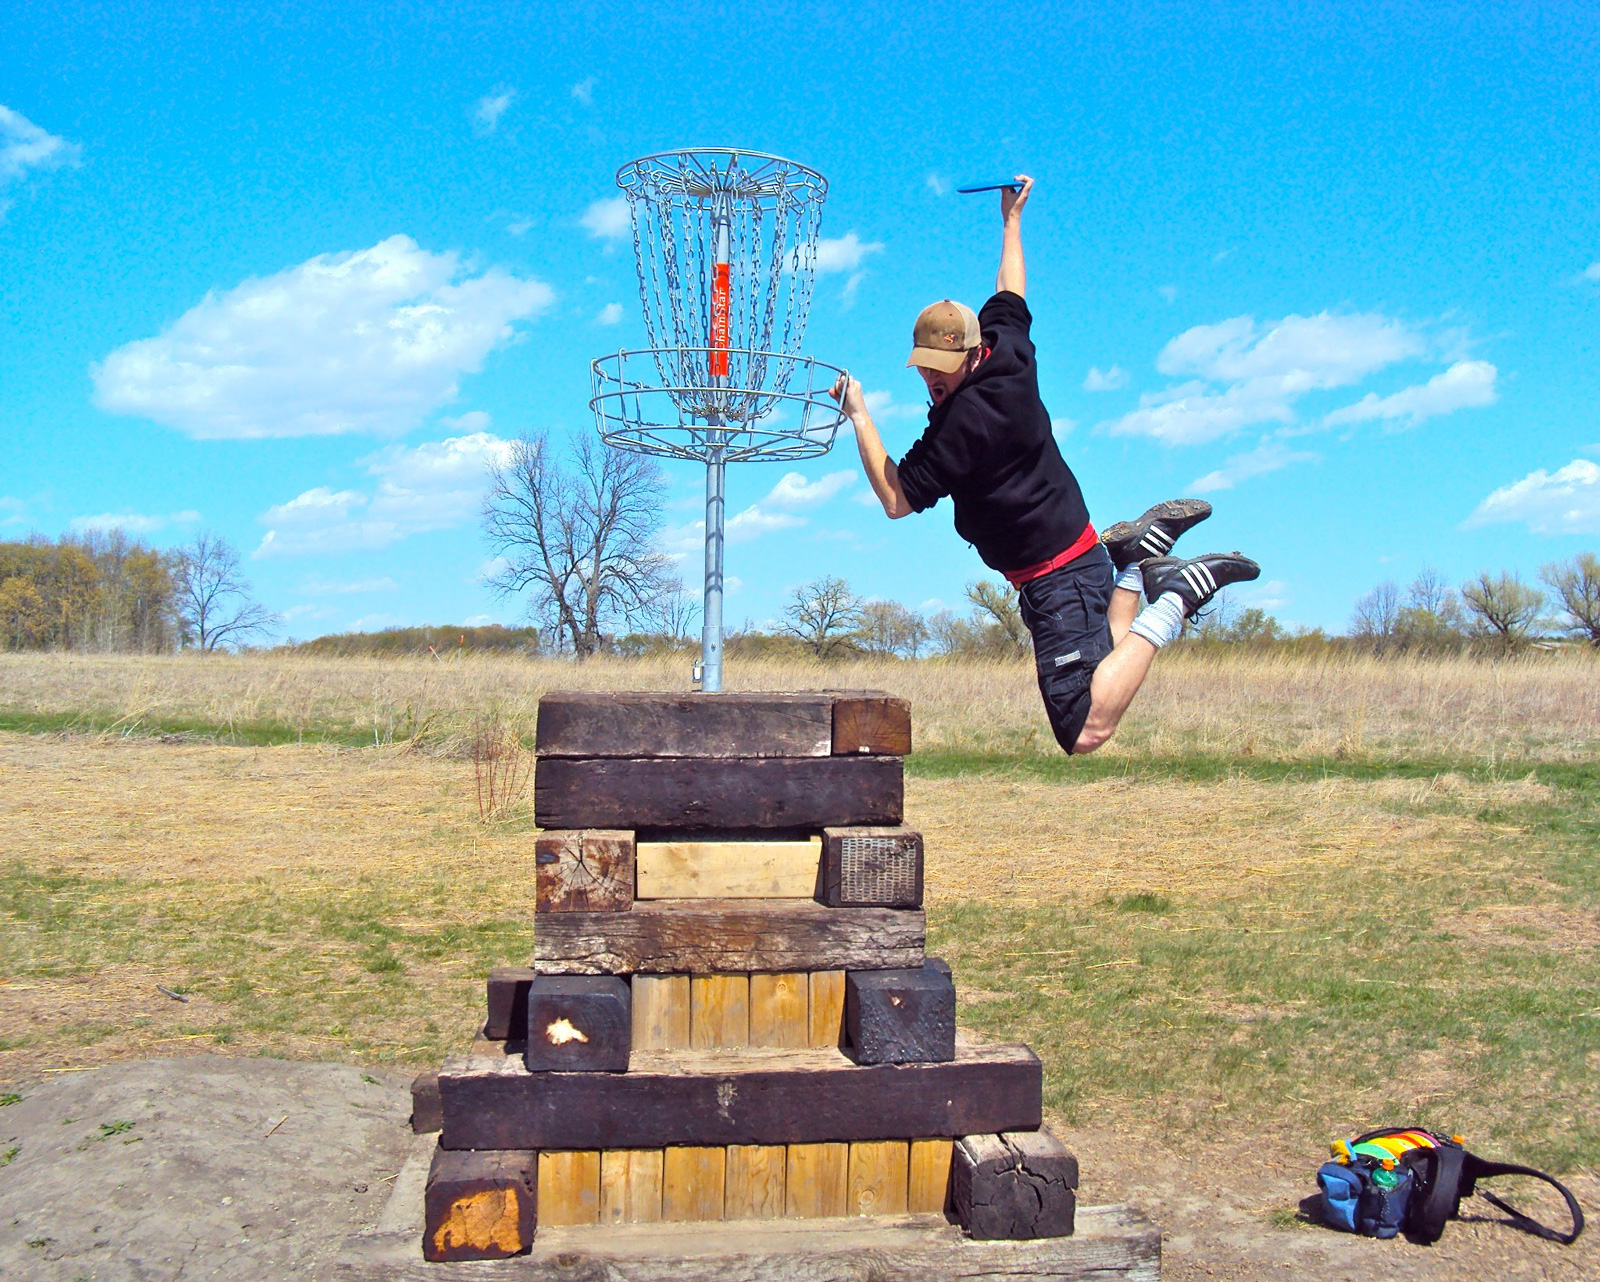 Slam dunking a disc in the basket!